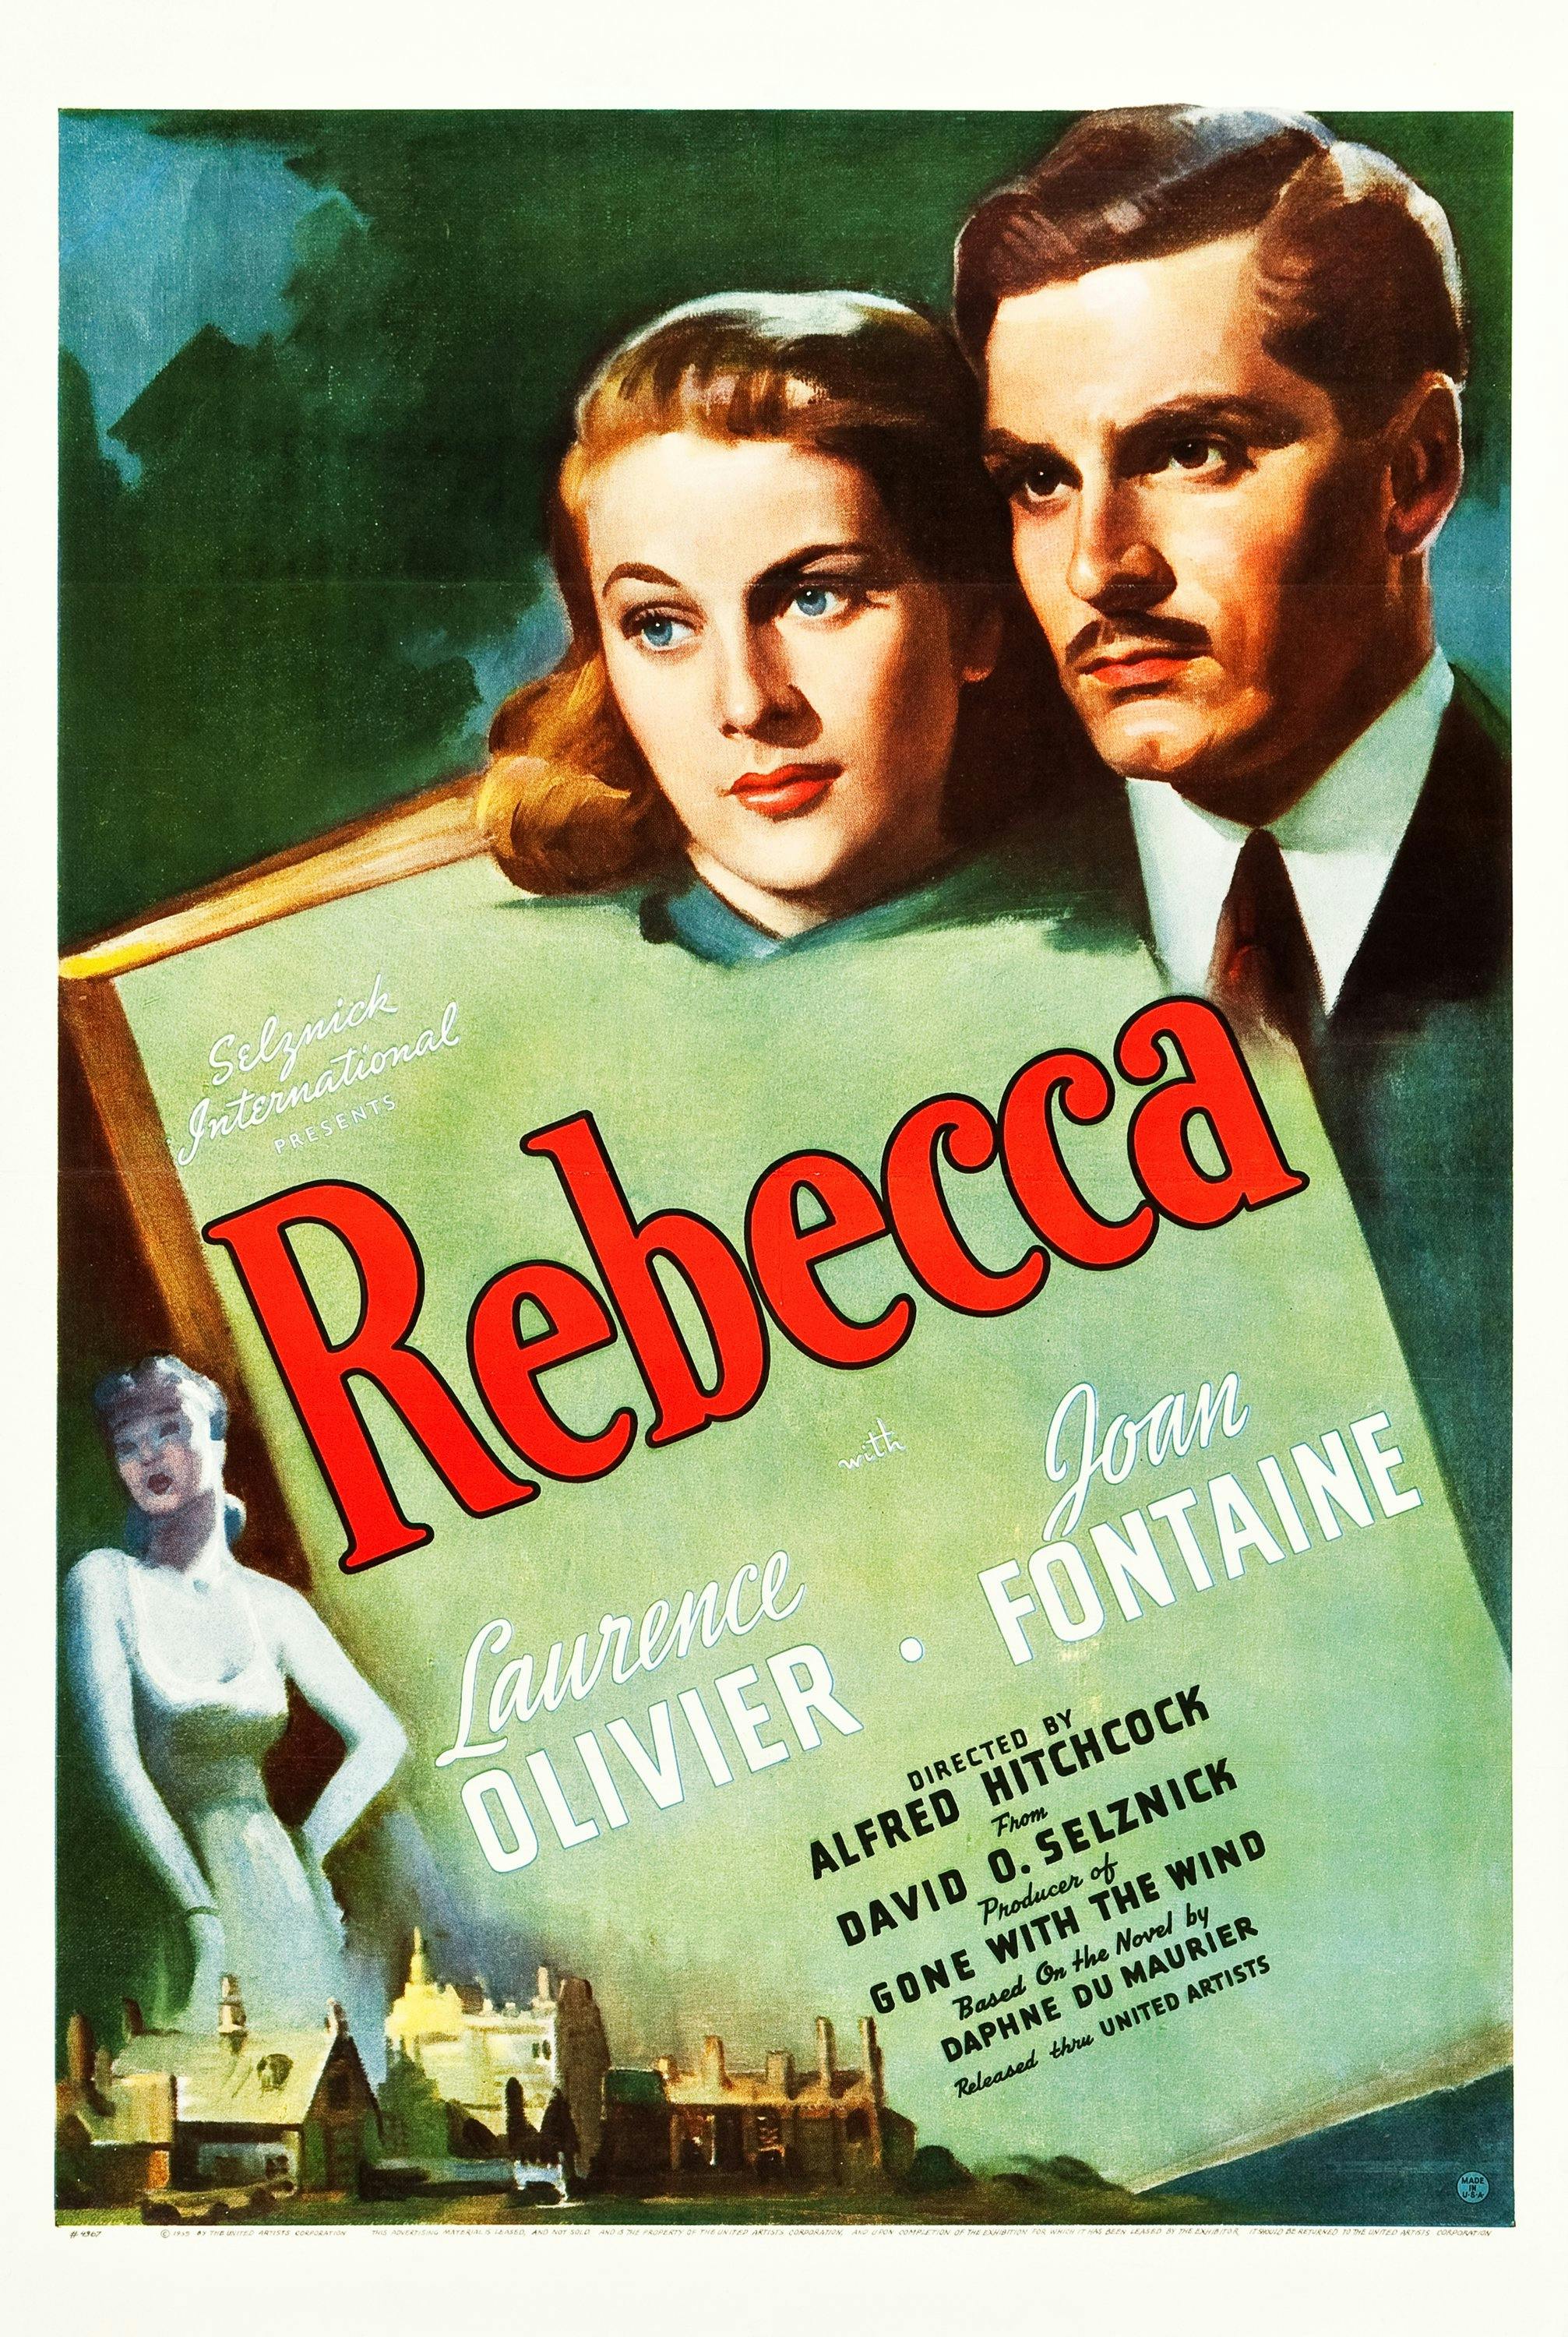 poster for the 1940 movie from director Alfred Hitchcock, rebecca starring Laurence Olivier and Joan fontaine